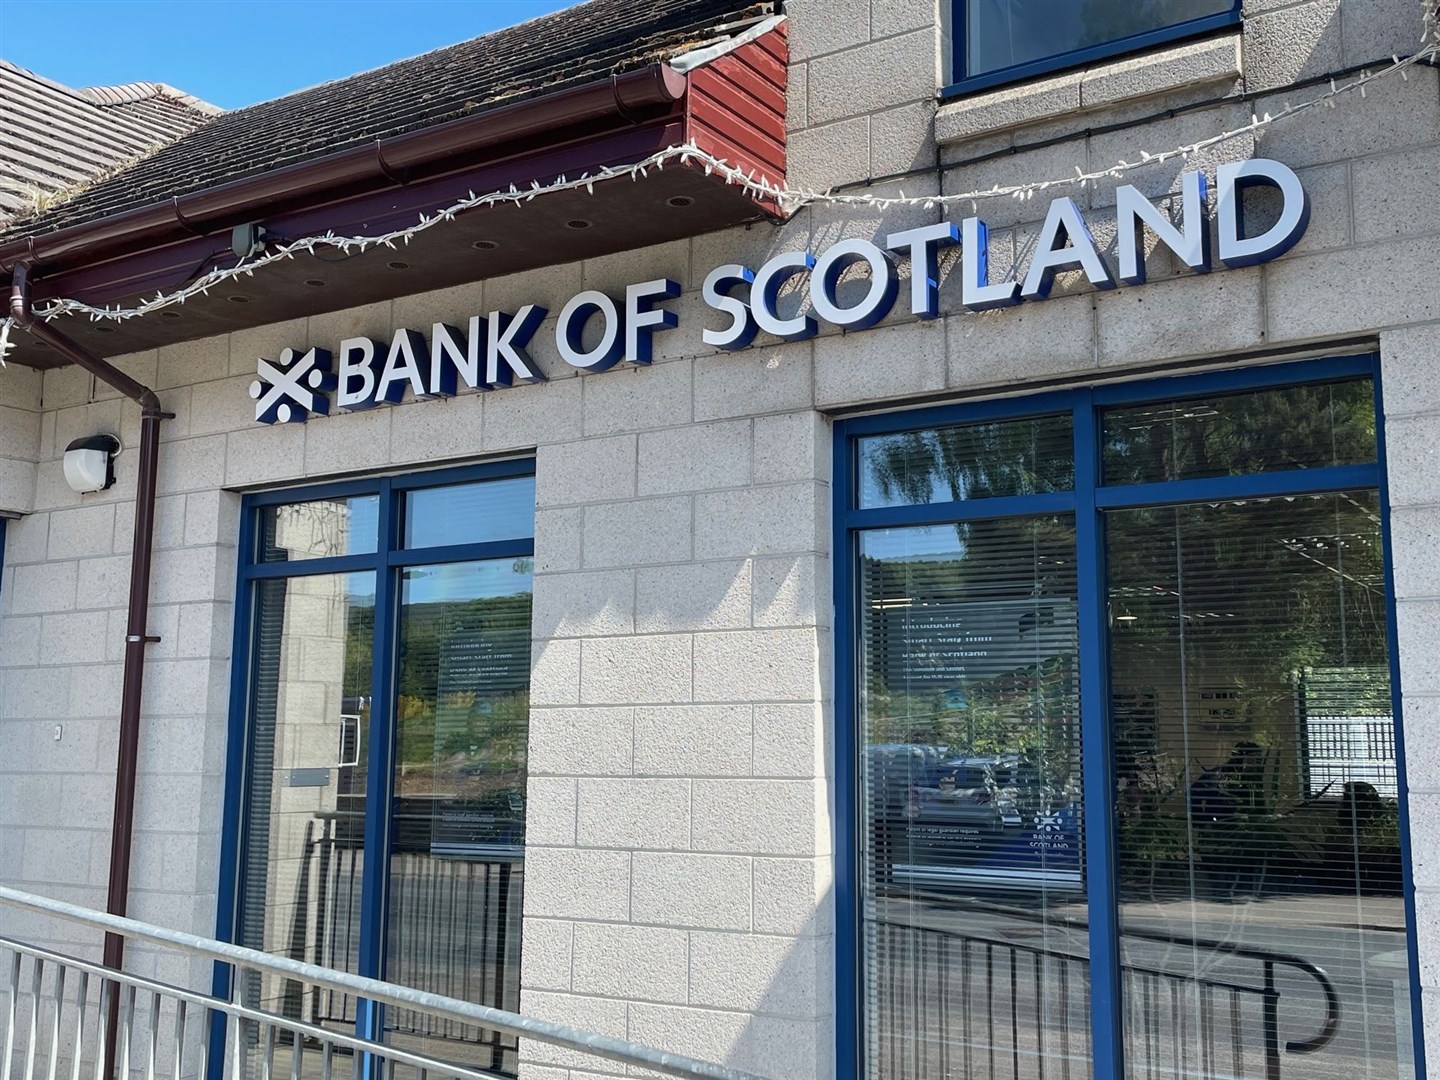 The Bank of Scotland has been a long time prescence in the centre of Aviemore.